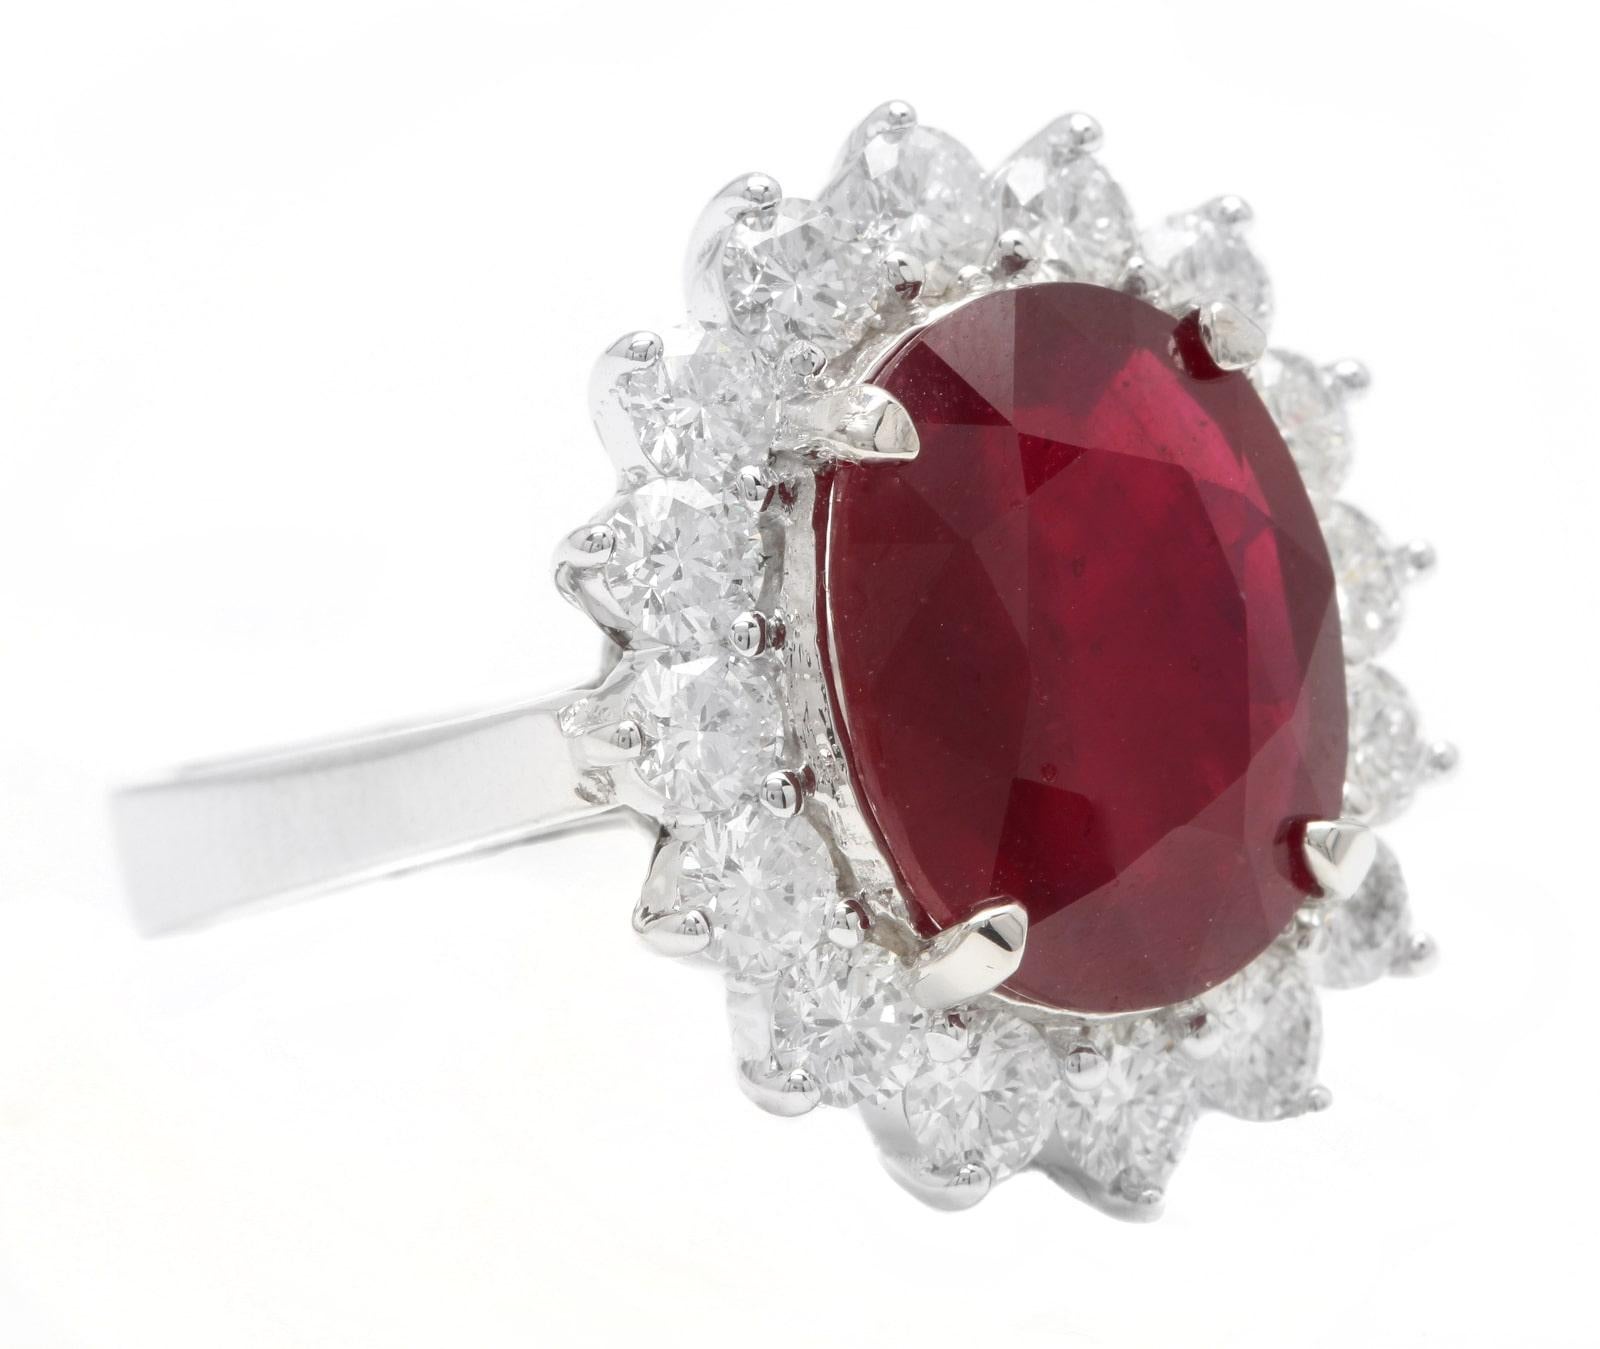 8.20 Carats Impressive Natural Red Ruby and Diamond 14K White Gold Ring

Suggested Replacement Value: $6,000.00

Total Red Ruby Weight is: Approx. 6.50 Carats (Lead Glass Filled)

Ruby Measures: Approx. 13.00 x 10.00mm

Natural Round Diamonds